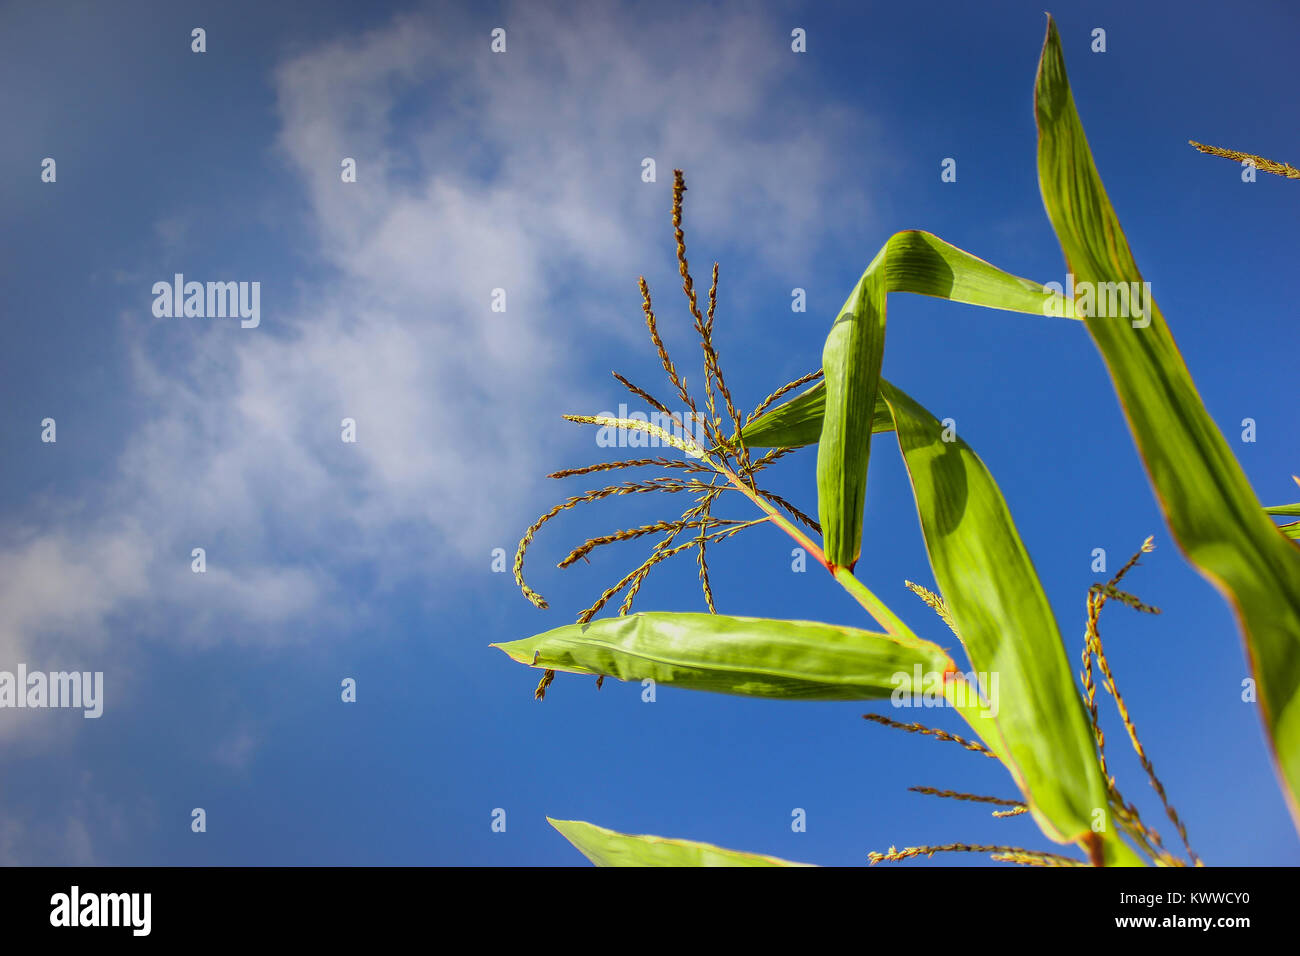 Corn plant with blue sky background Stock Photo